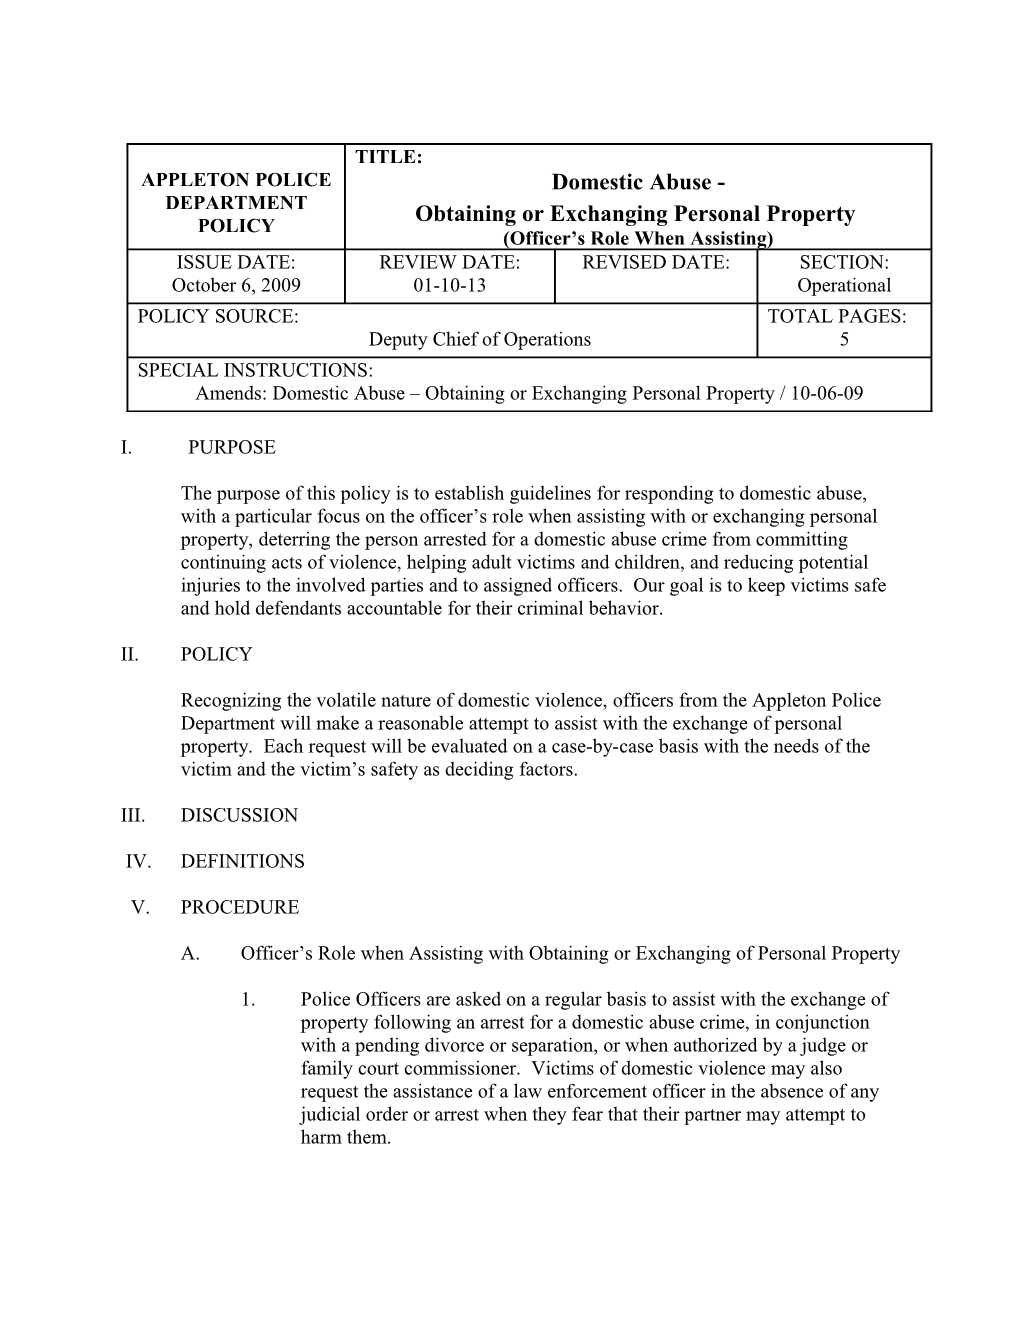 Issued Date: October 2009 Obtaining Or Exchanging Personal Property Page 5 of 5